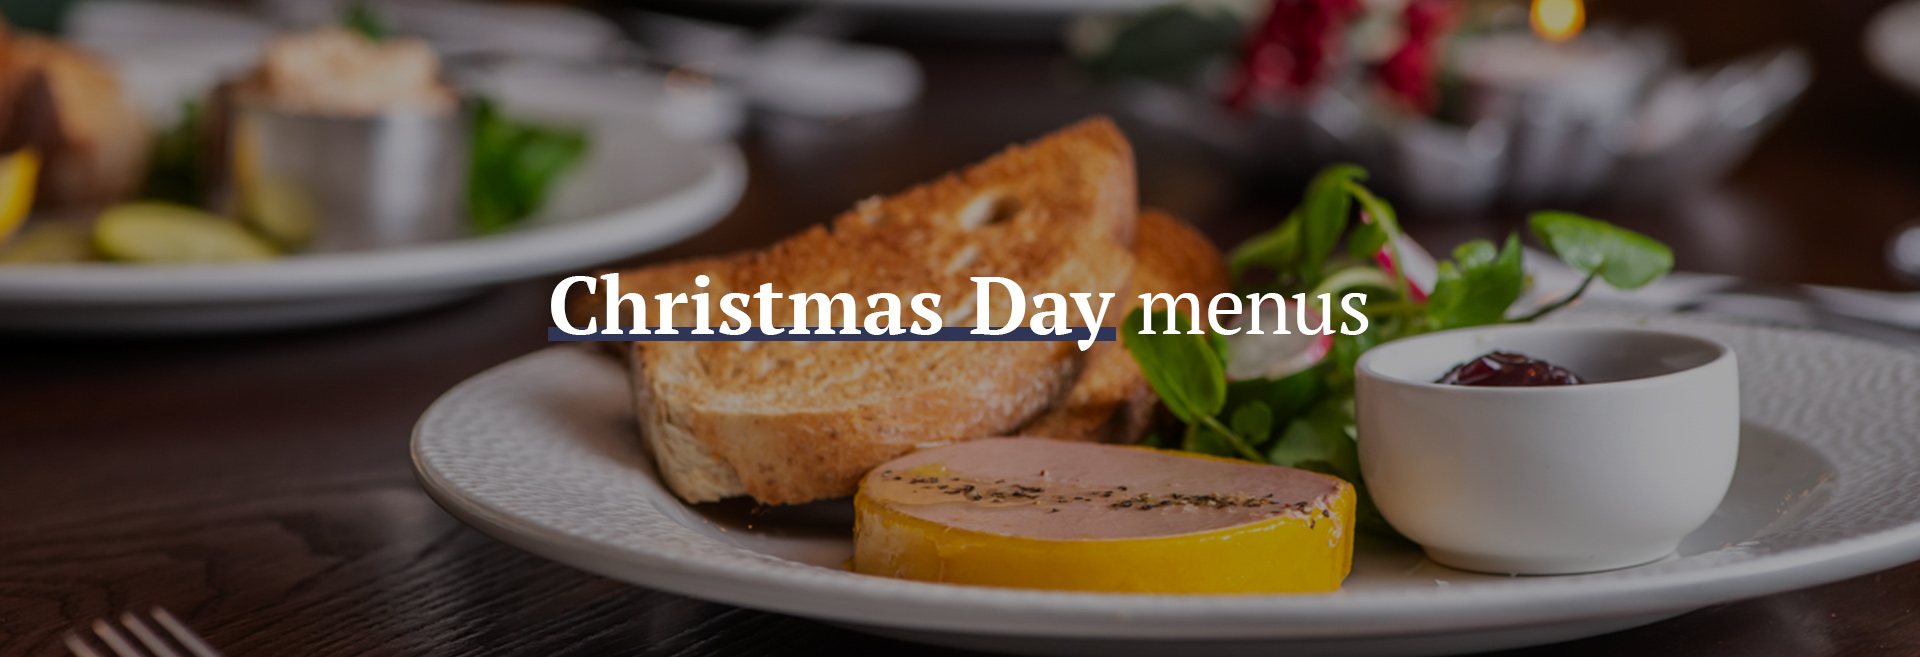 Christmas Day Menu at The Plough on the Moor